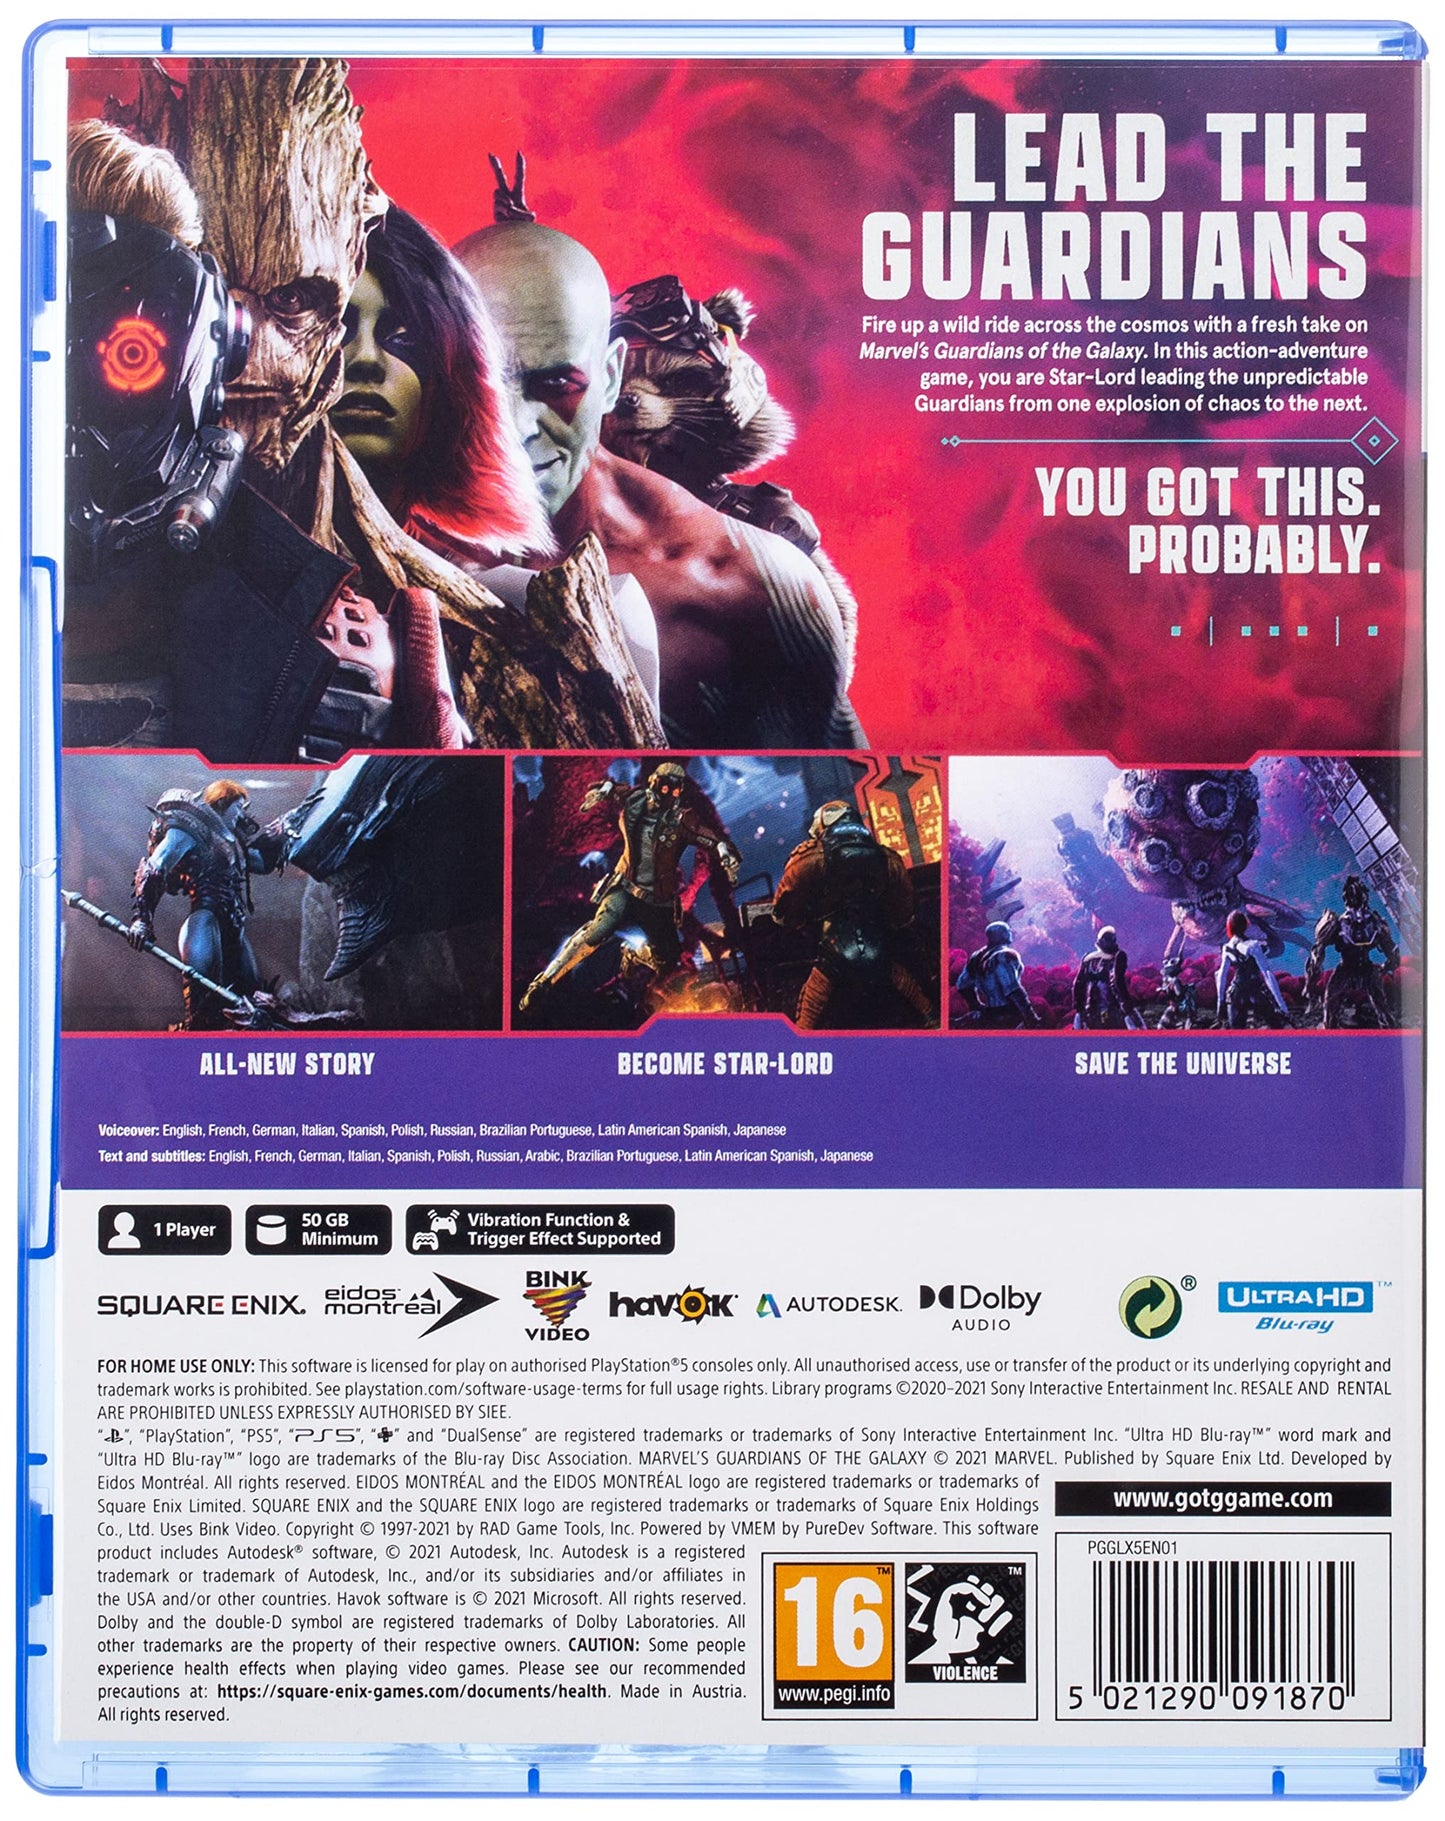 MARVELS GUARDIANS OF THE GALAXY PS5 GAME